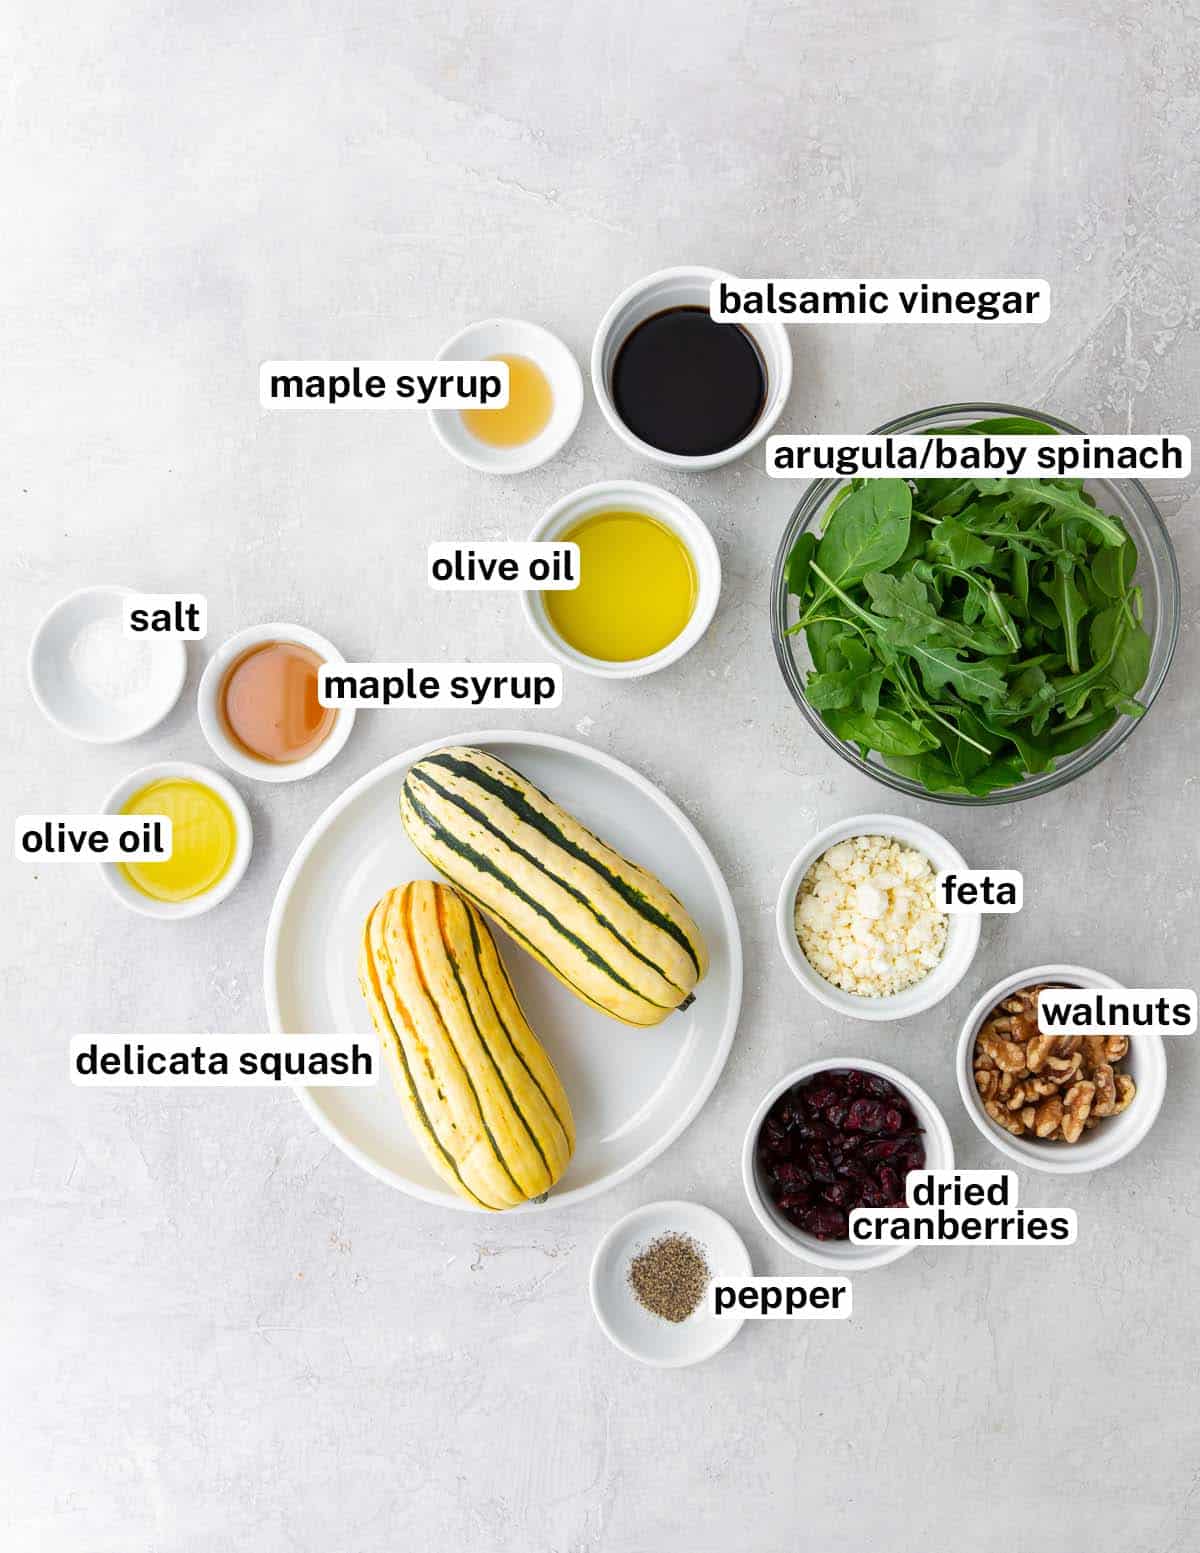 The ingredients to make delicata squash salad with overlay text.